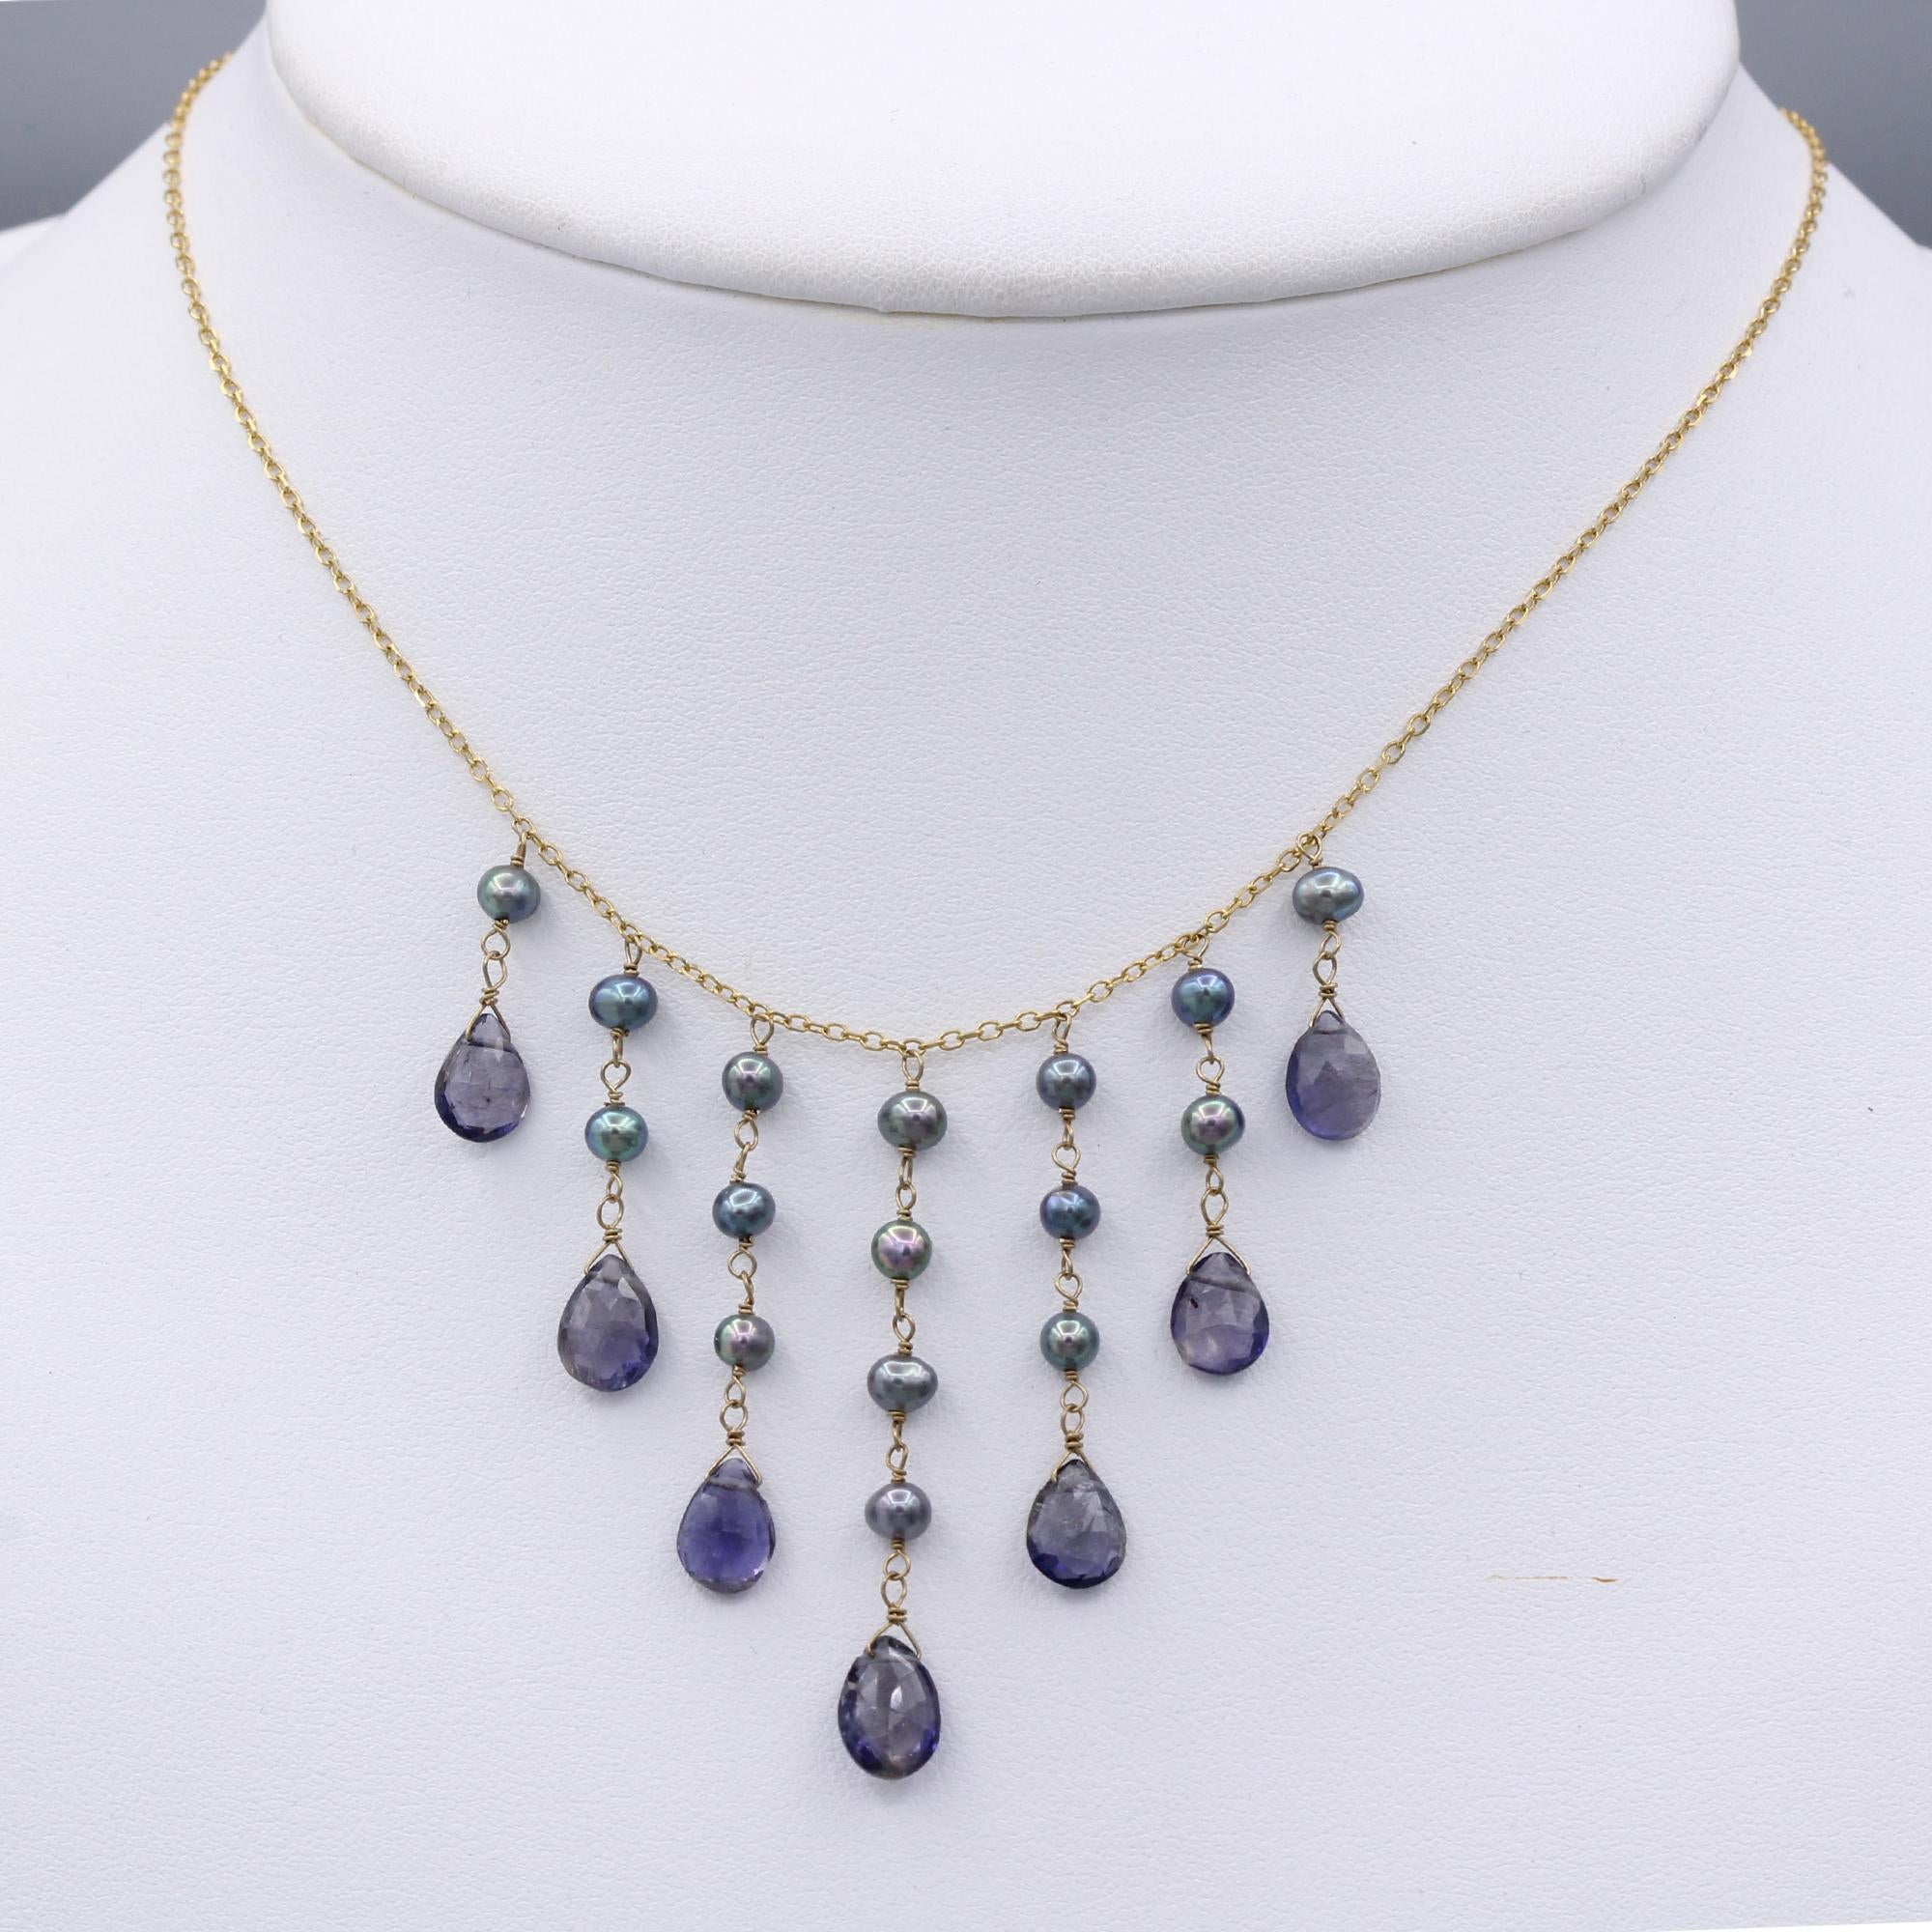 Elegant Dangling Pearls and Amethyst Necklace
14k Yellow Gold
Length 16’ Inch
Natural Amethyst blue-ish tone color approx. 8.0  mm drops
Fresh Water Grey Pearl approx. 3.0 mm
Dangle Length approx. 1.5’ Inch
Spring ring lock
Total weight 4.30 grams
